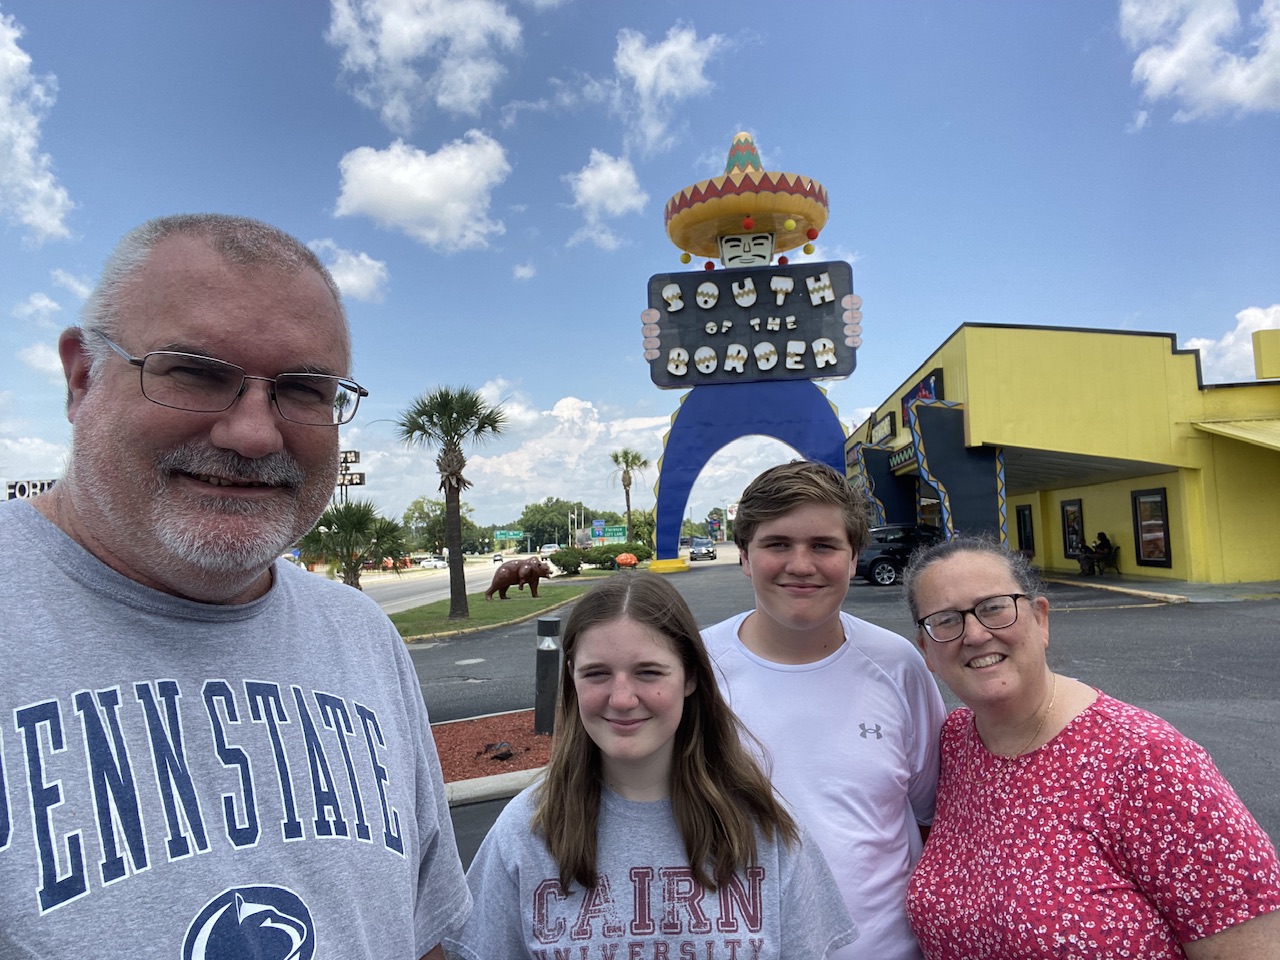 Visiting Pedro at South of the Border is a generational experience.